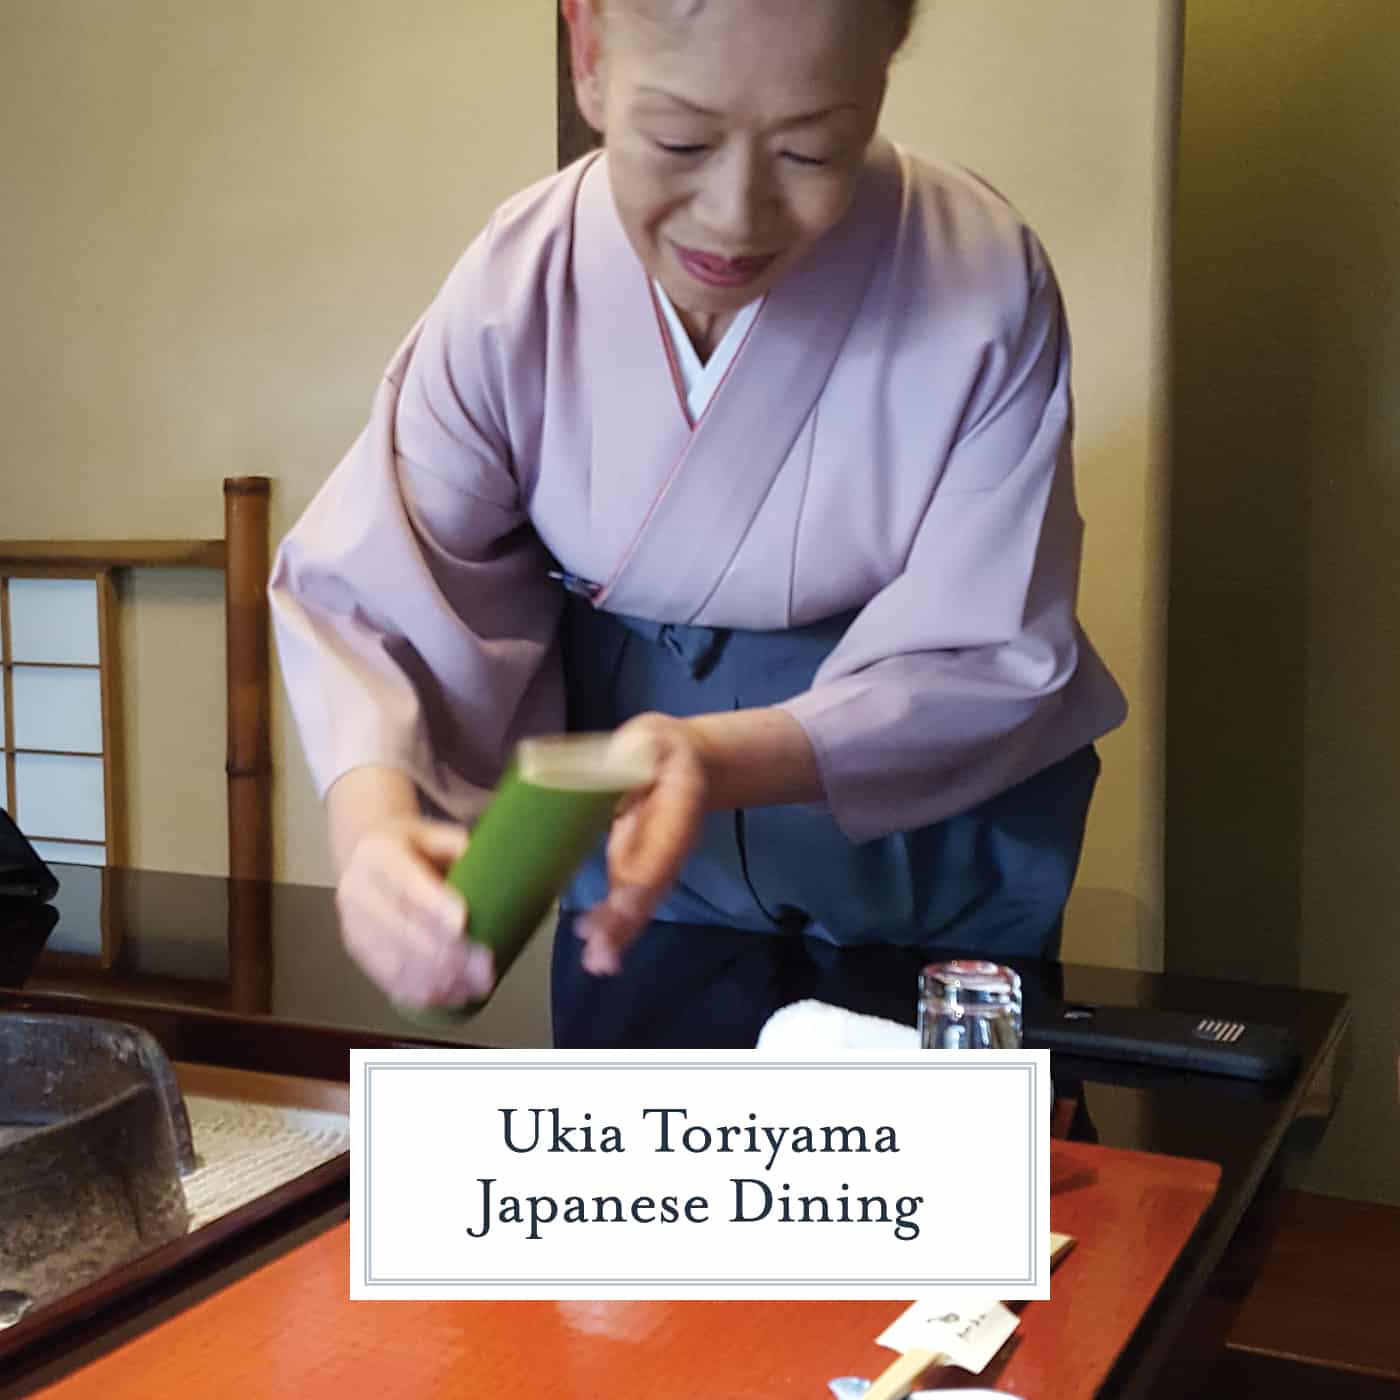 If you are looking for authentic Japanese dining while in Tokyo, drive right outside the city limits to Ukia Toriyama for amazing views and food. #tokyo www.savoryexperiments.com 